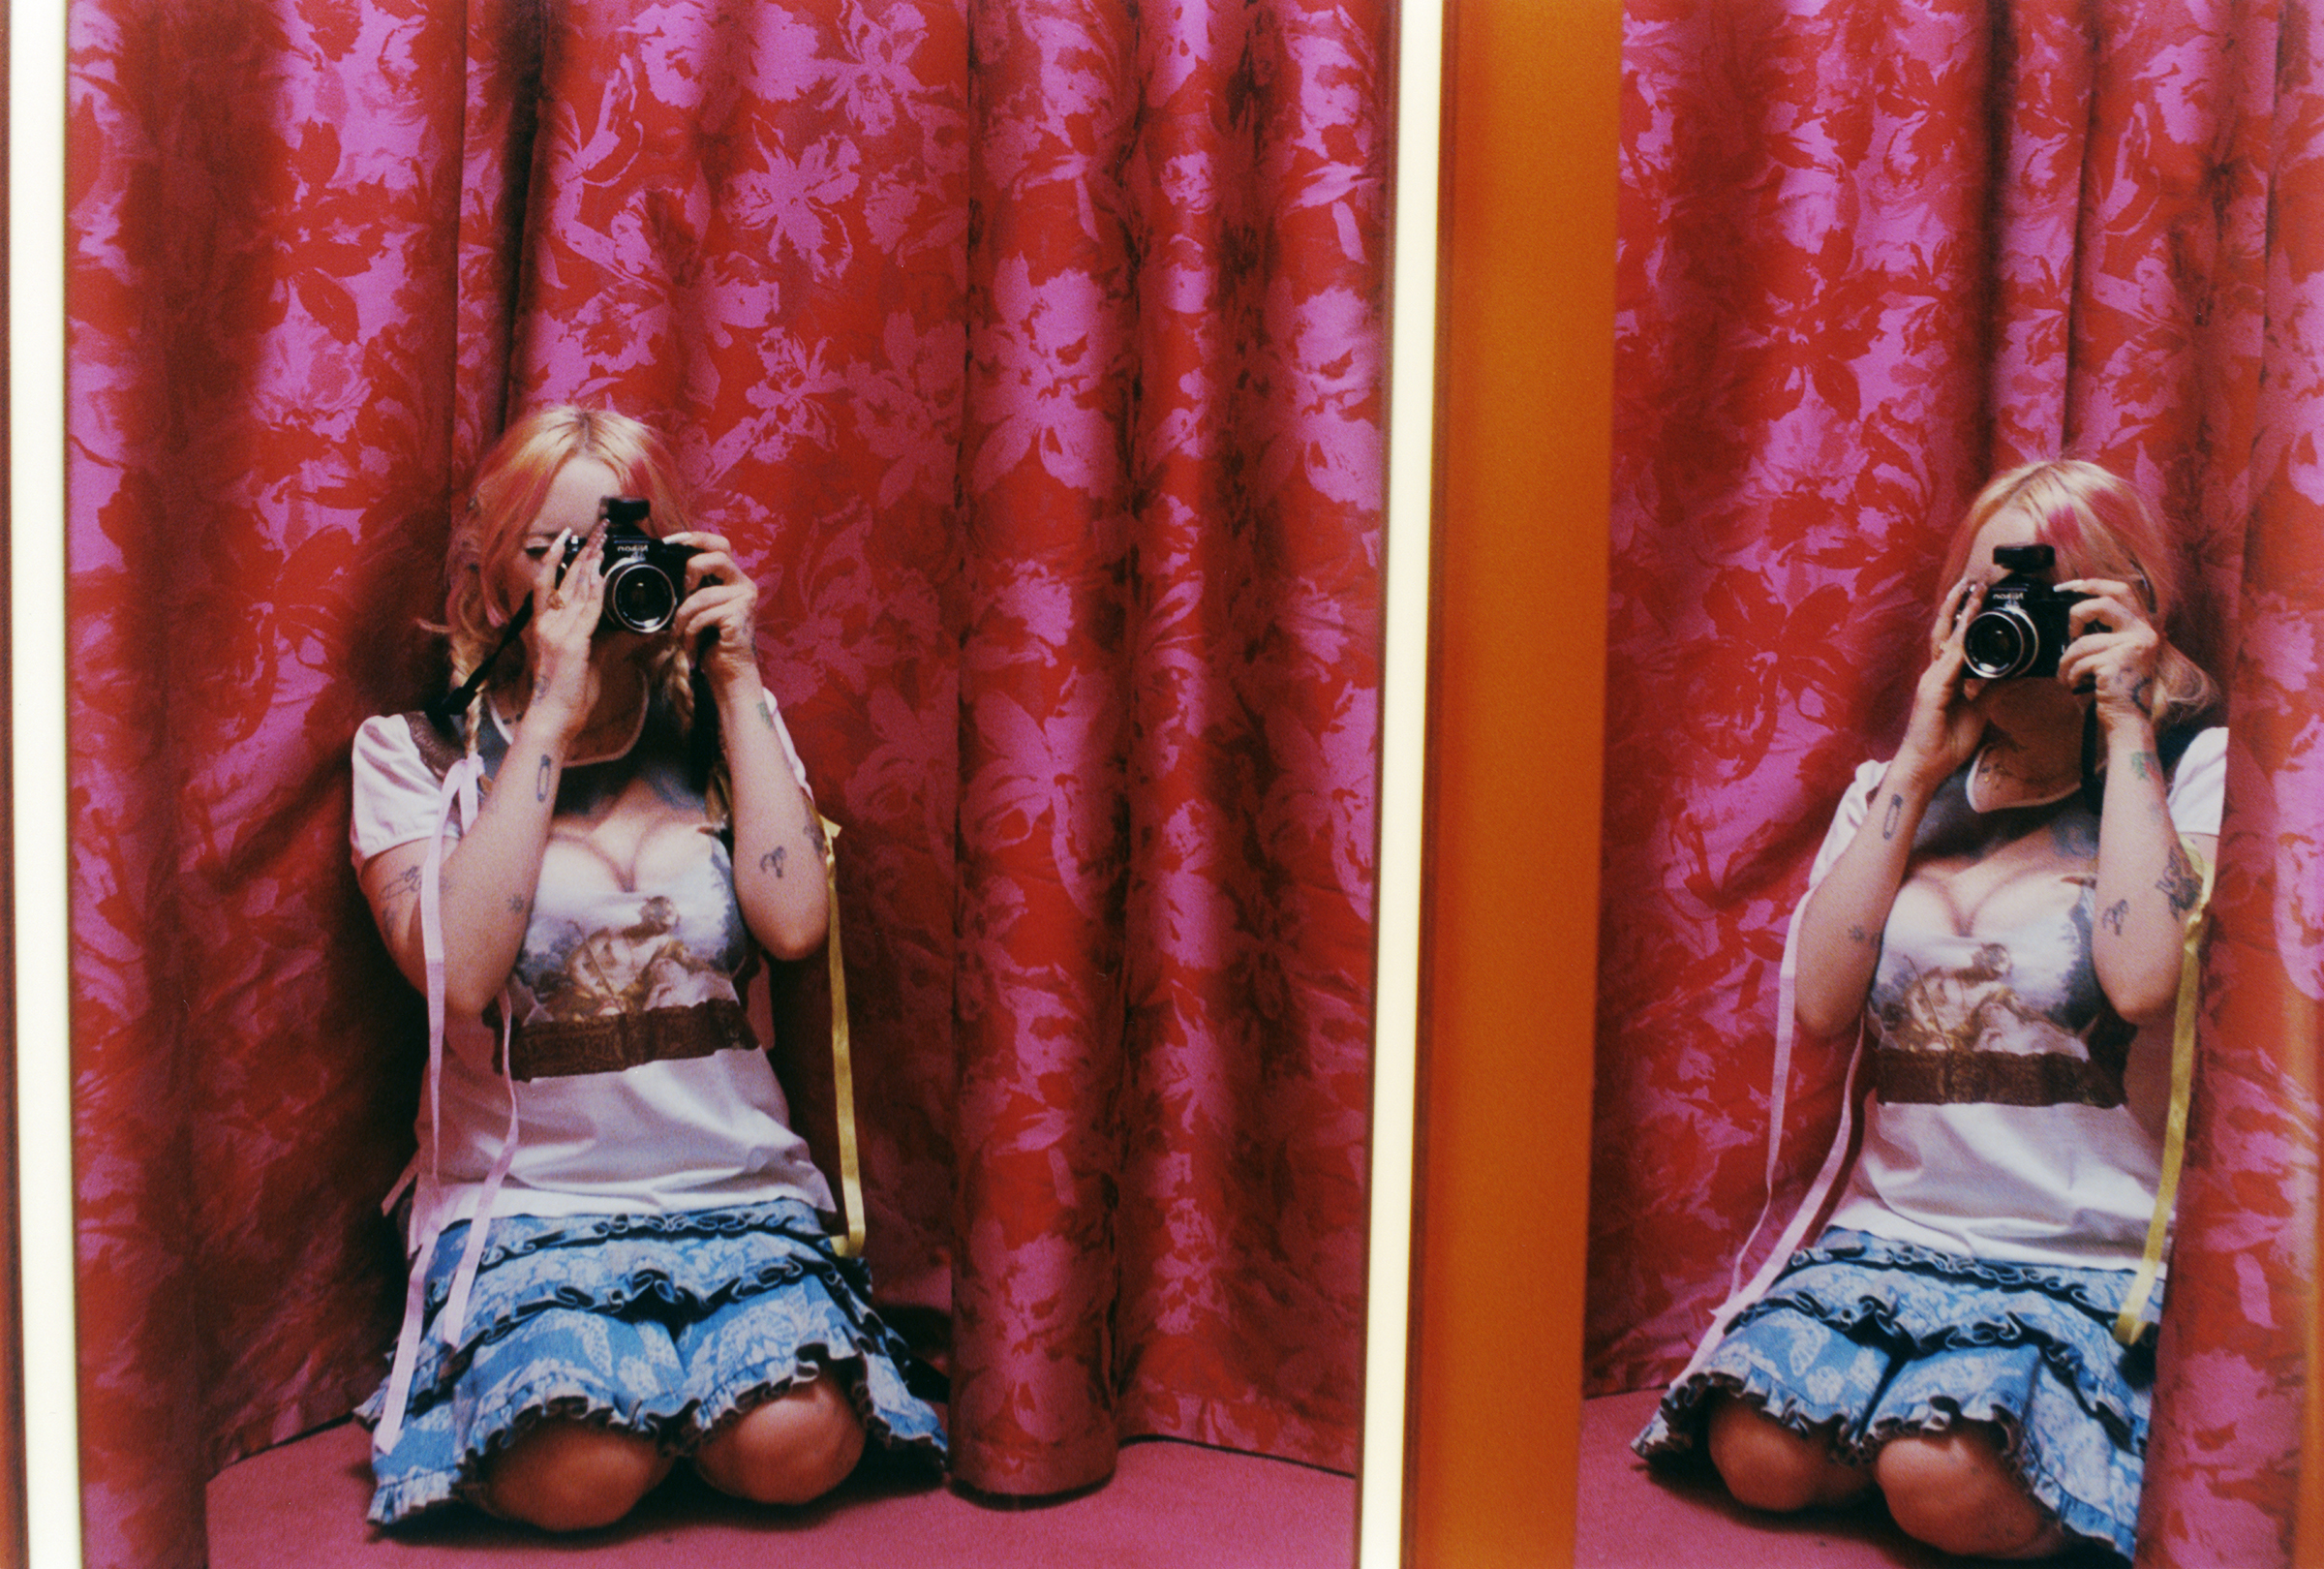 harmony tividad taking a self portrait in a dressing room with pink curtains. Photography Ashley Markle